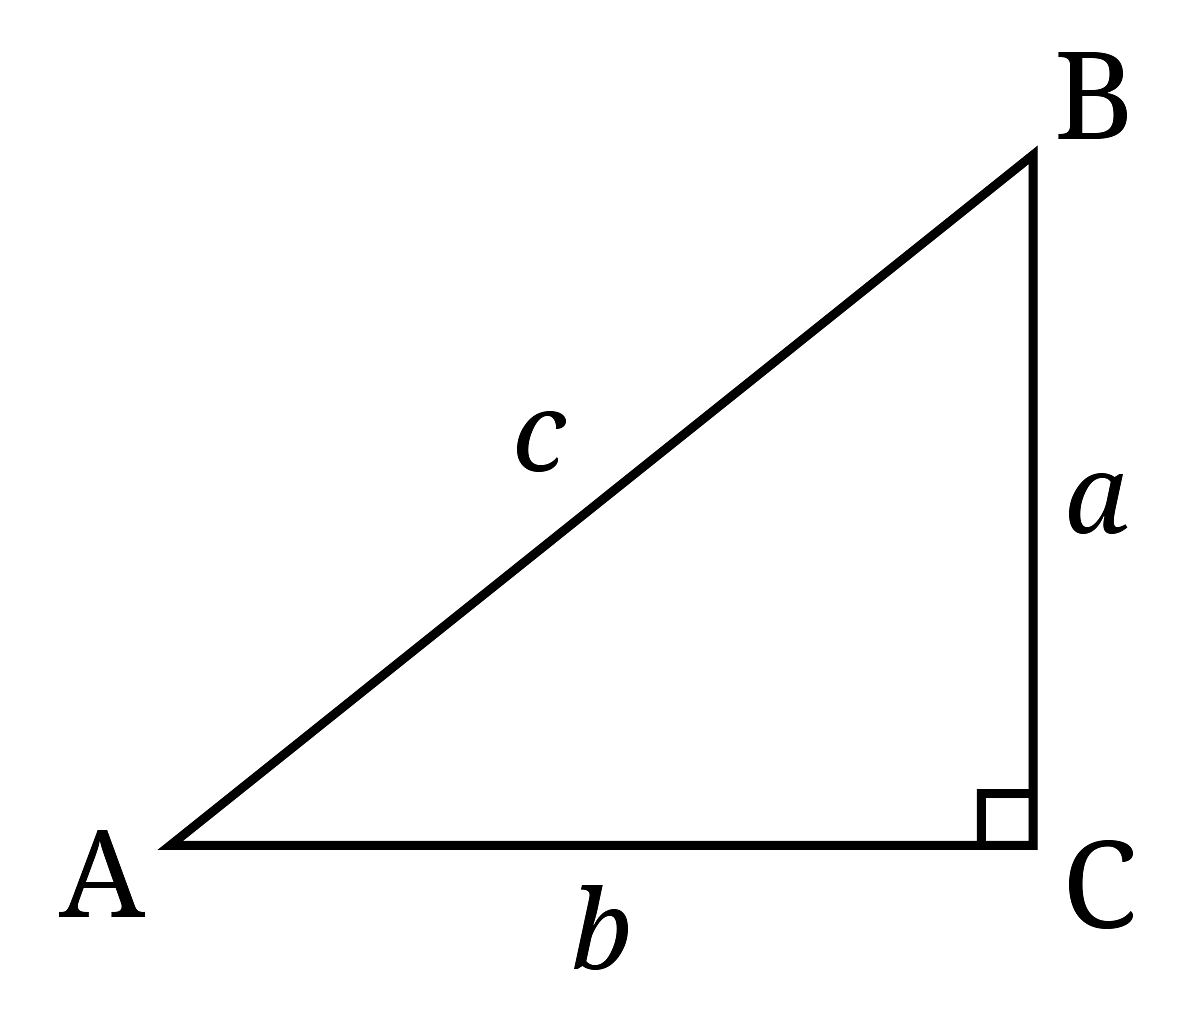 Right Angle Triangle with Sides AB, BC and CA